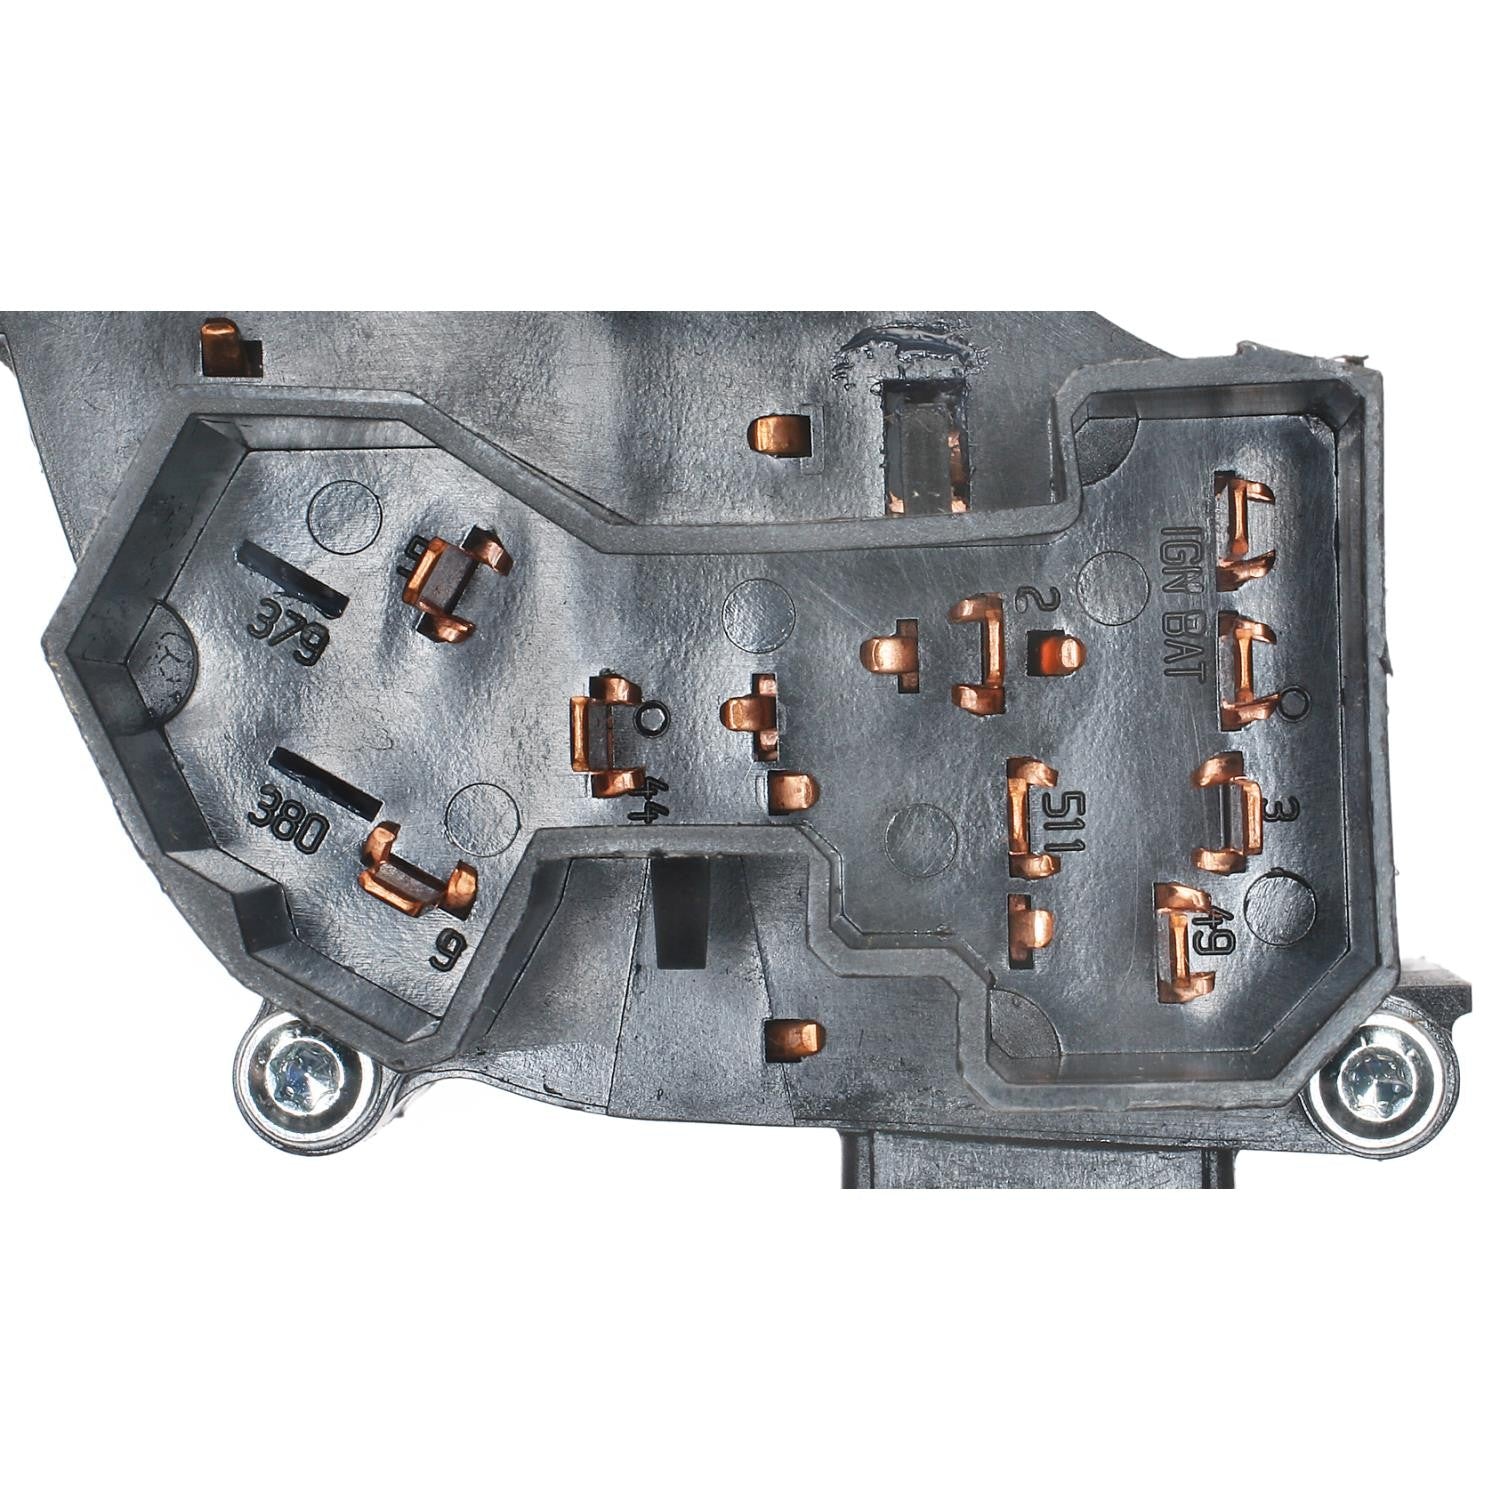 Standard CBS-1590  Switch for Ford Taurus Mercury Sable FWD